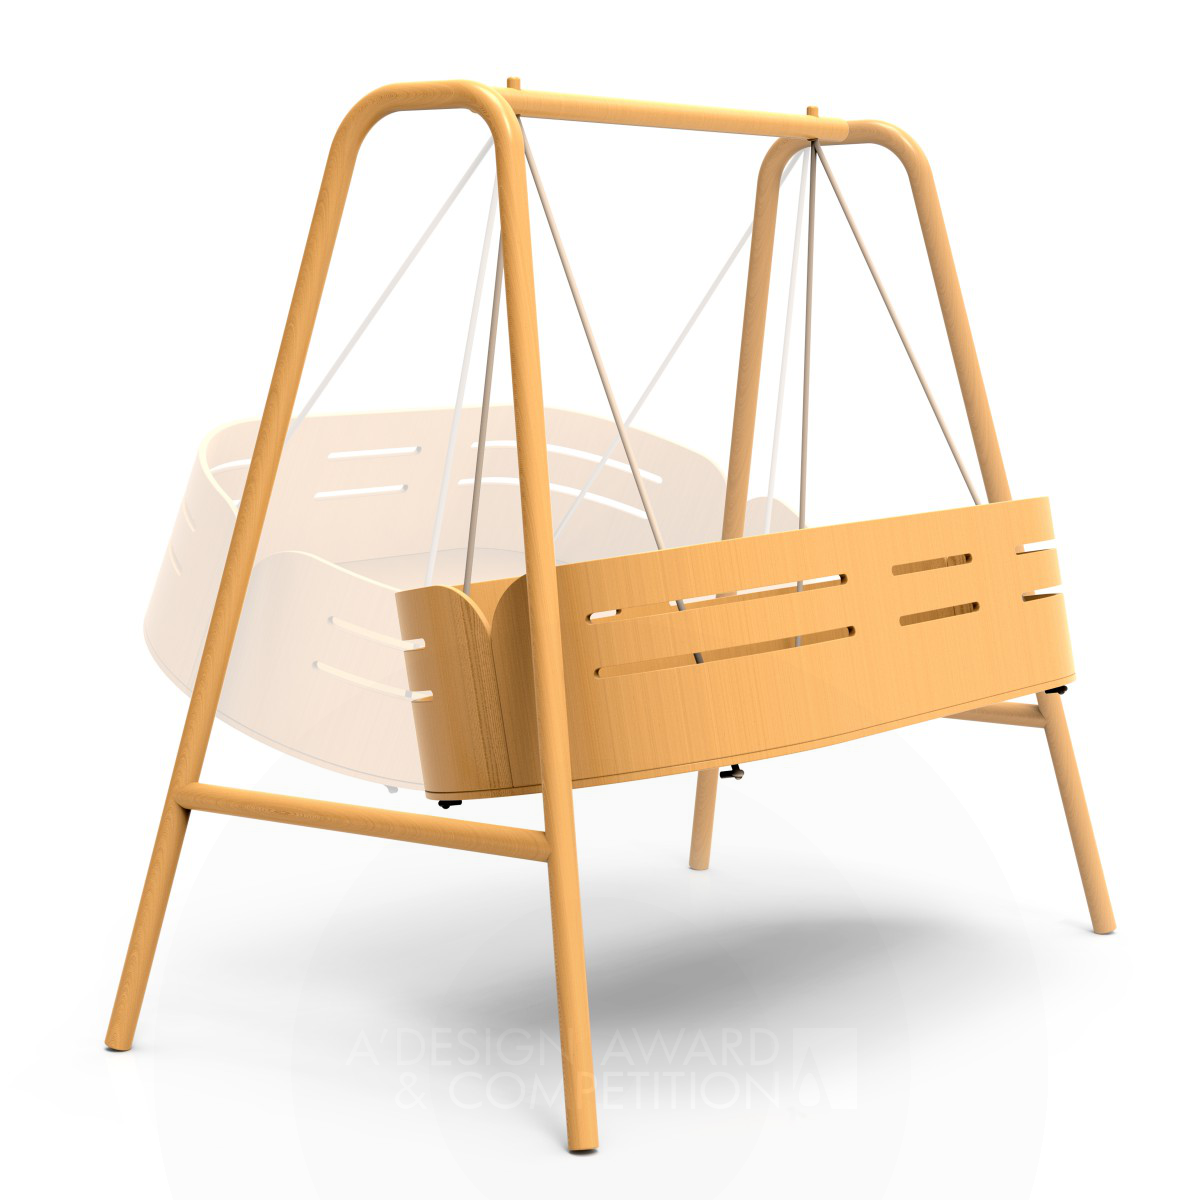 Jiankun SUN wins Iron at the prestigious A' Baby, Kids and Children's Products Design Award with Grow up Multifunctional crib.